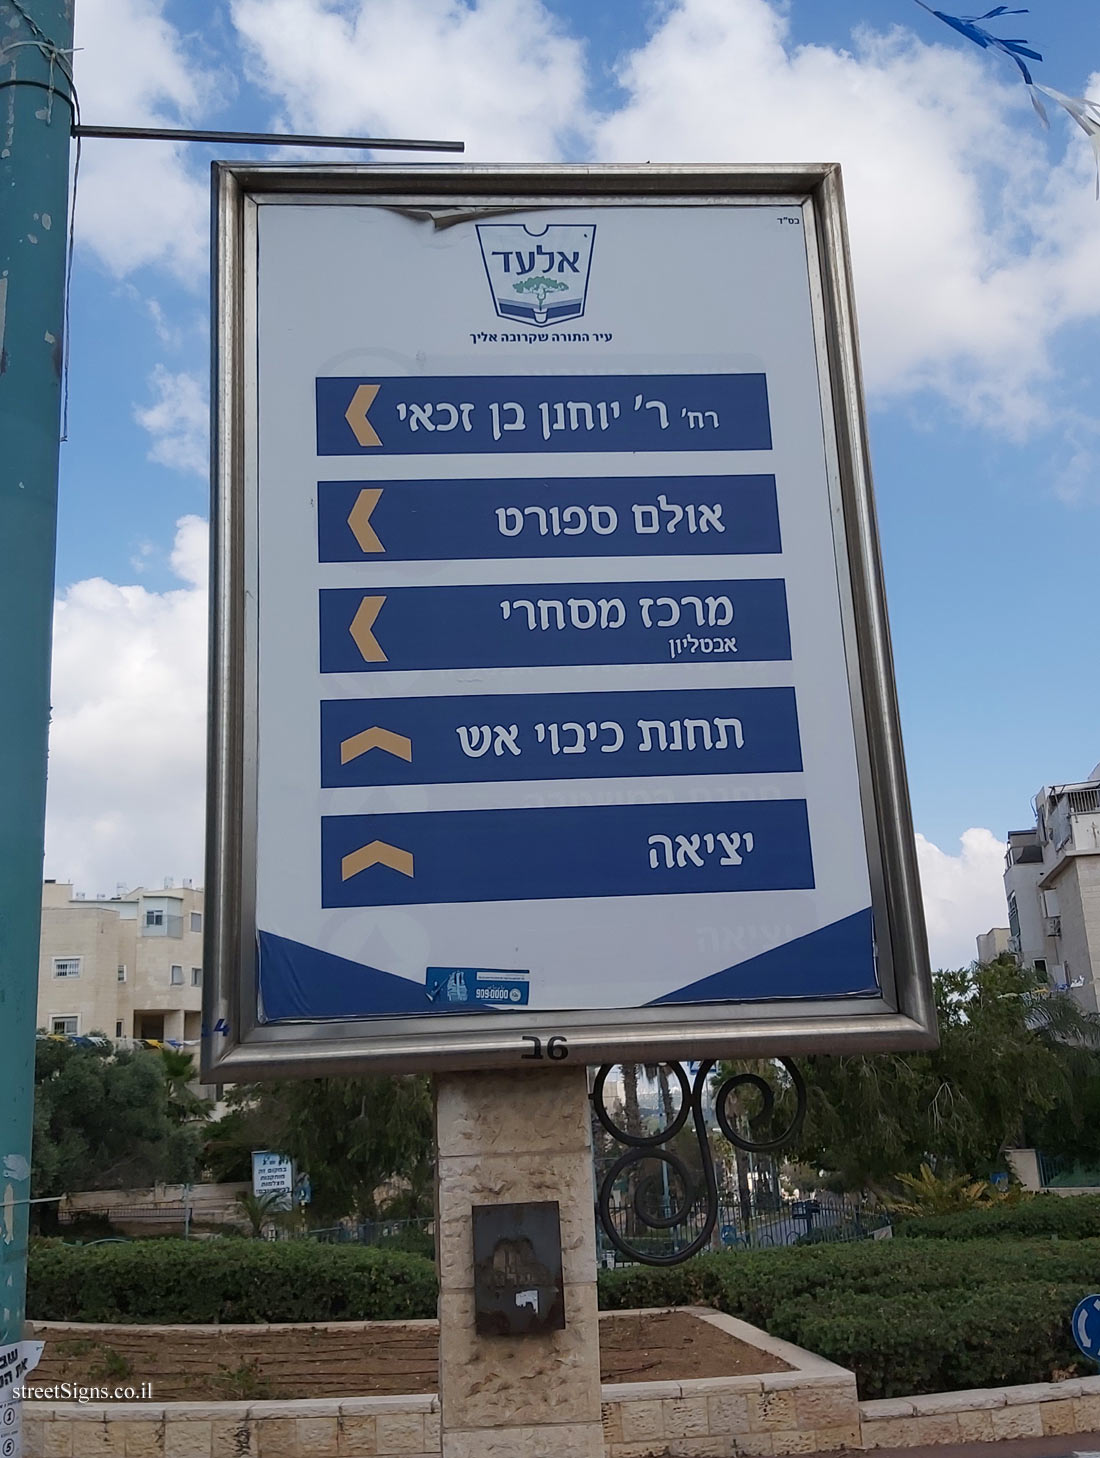 Elad - A direction sign pointing to sites in the city